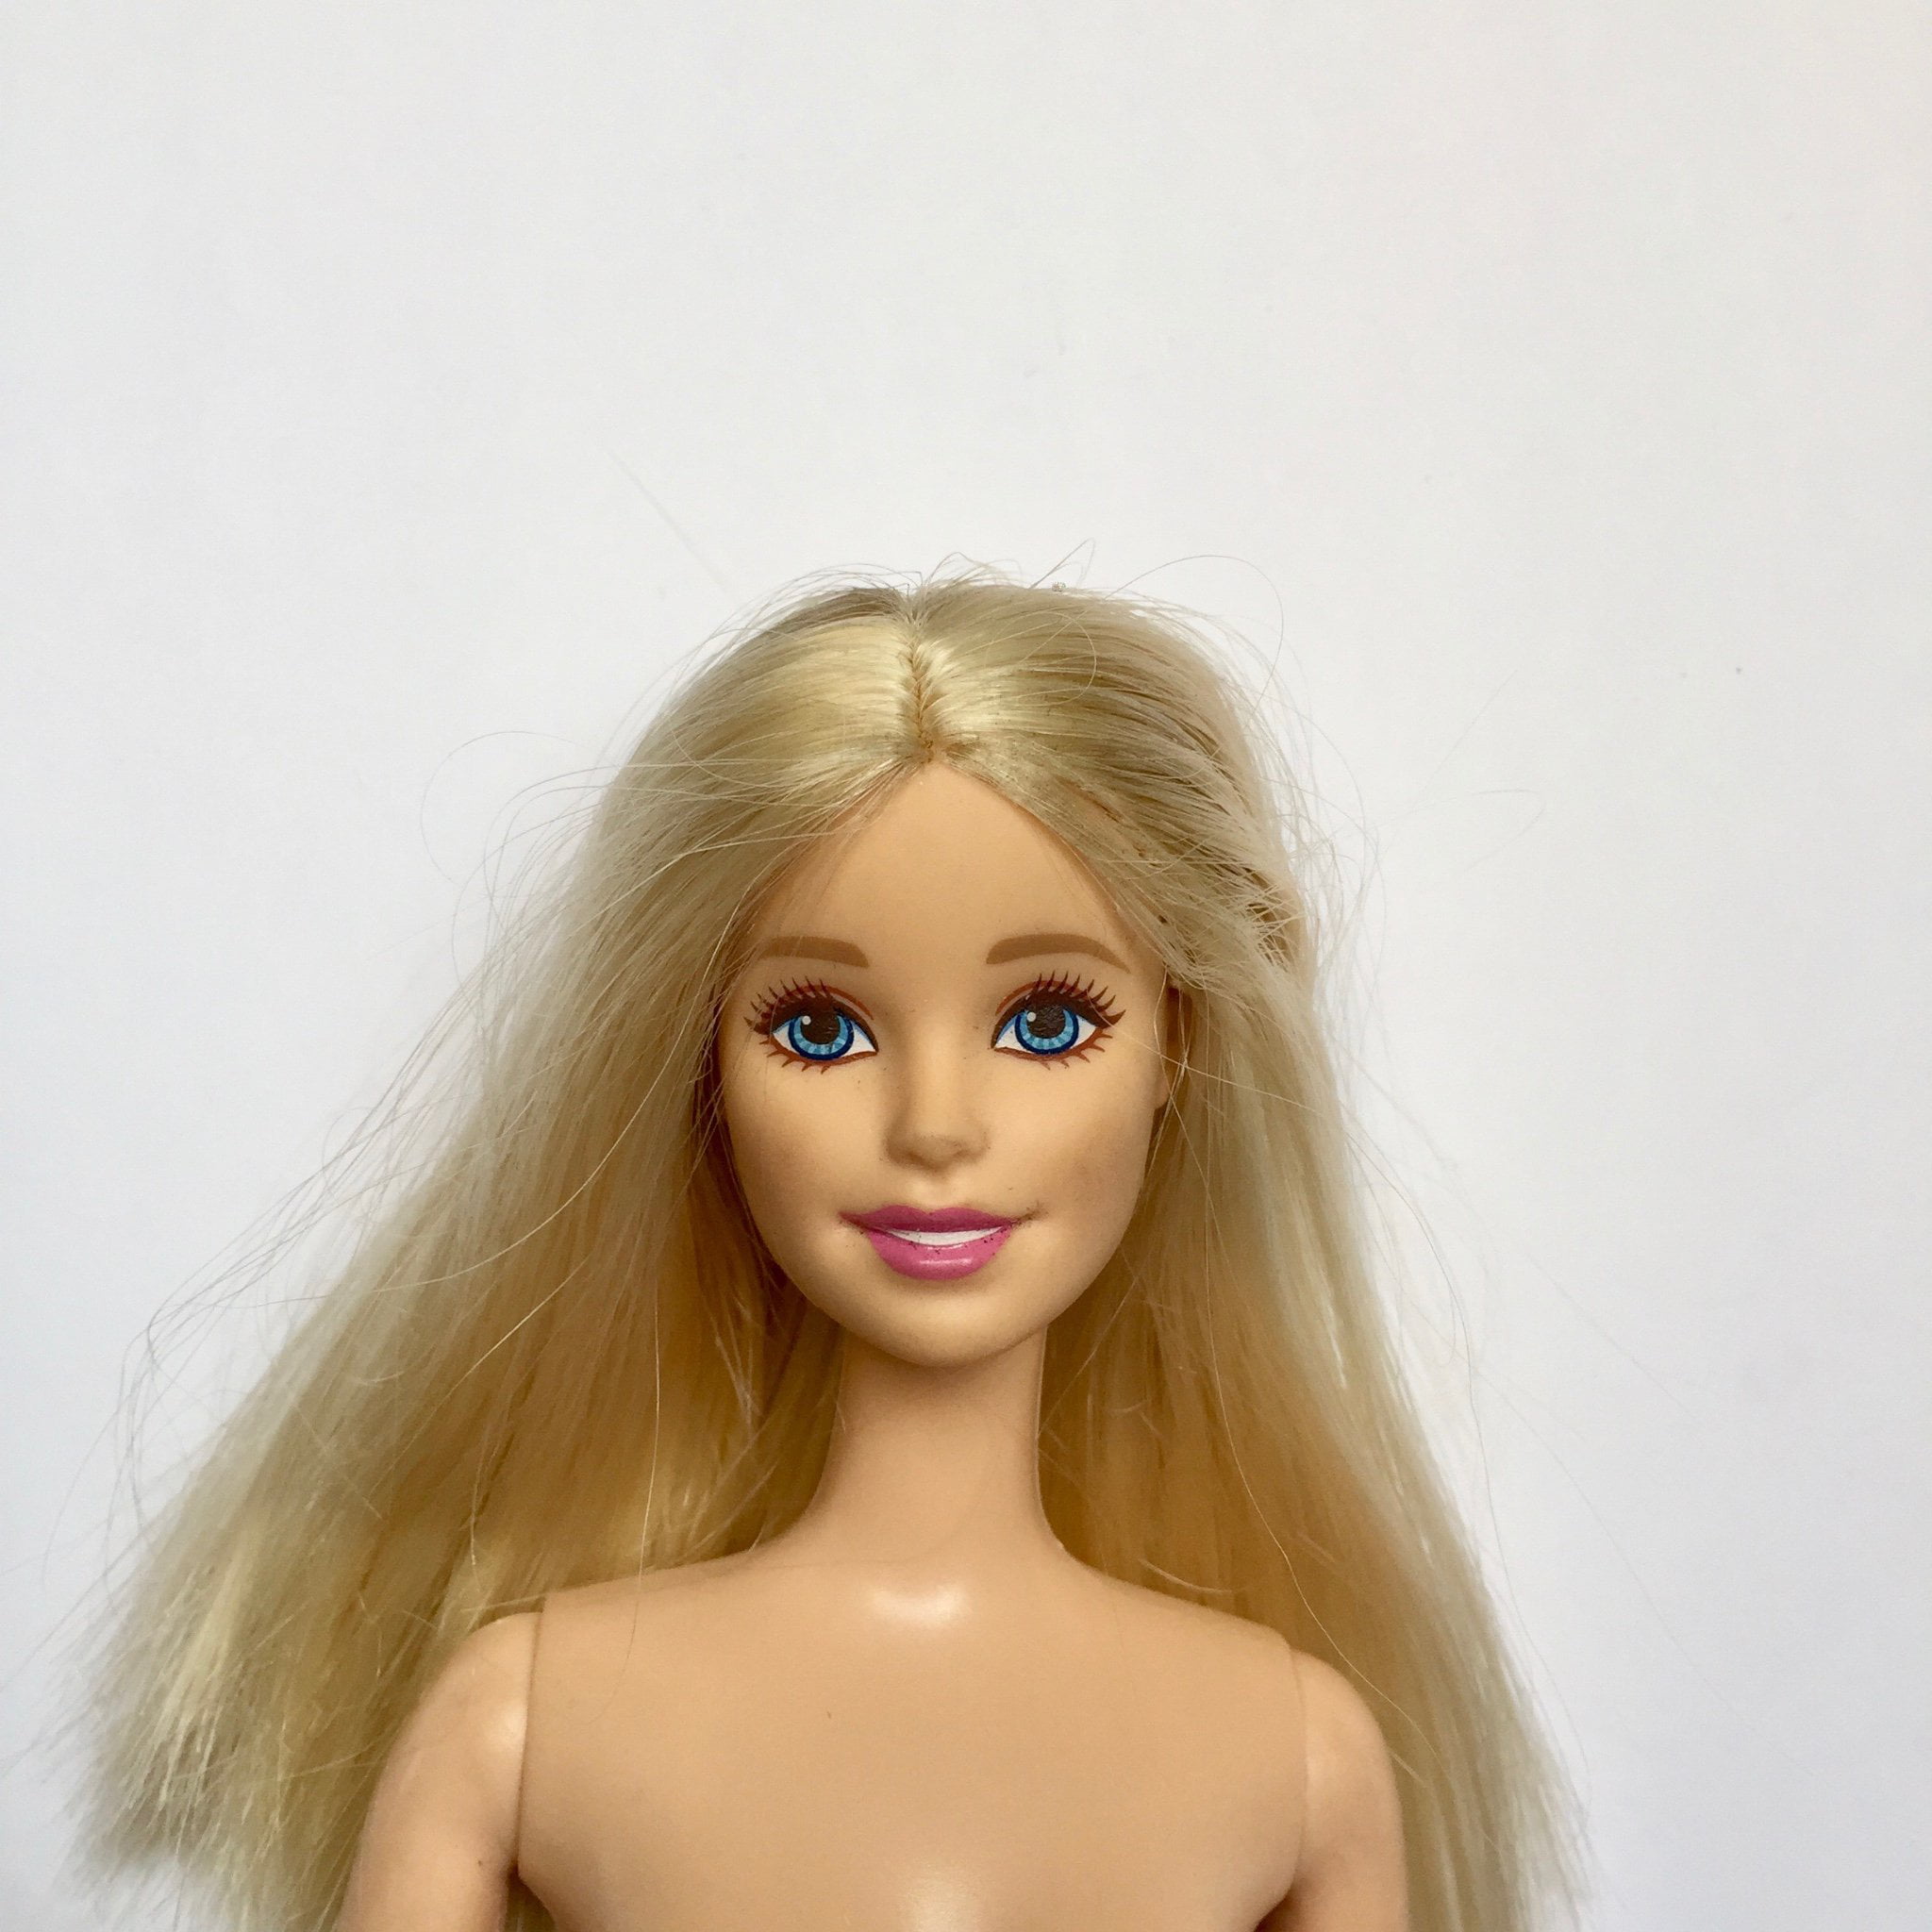 Details about   Barbie Skipper Babysitters Inc Blue Eyes Blonde Hair Baby Accessories Diaper New